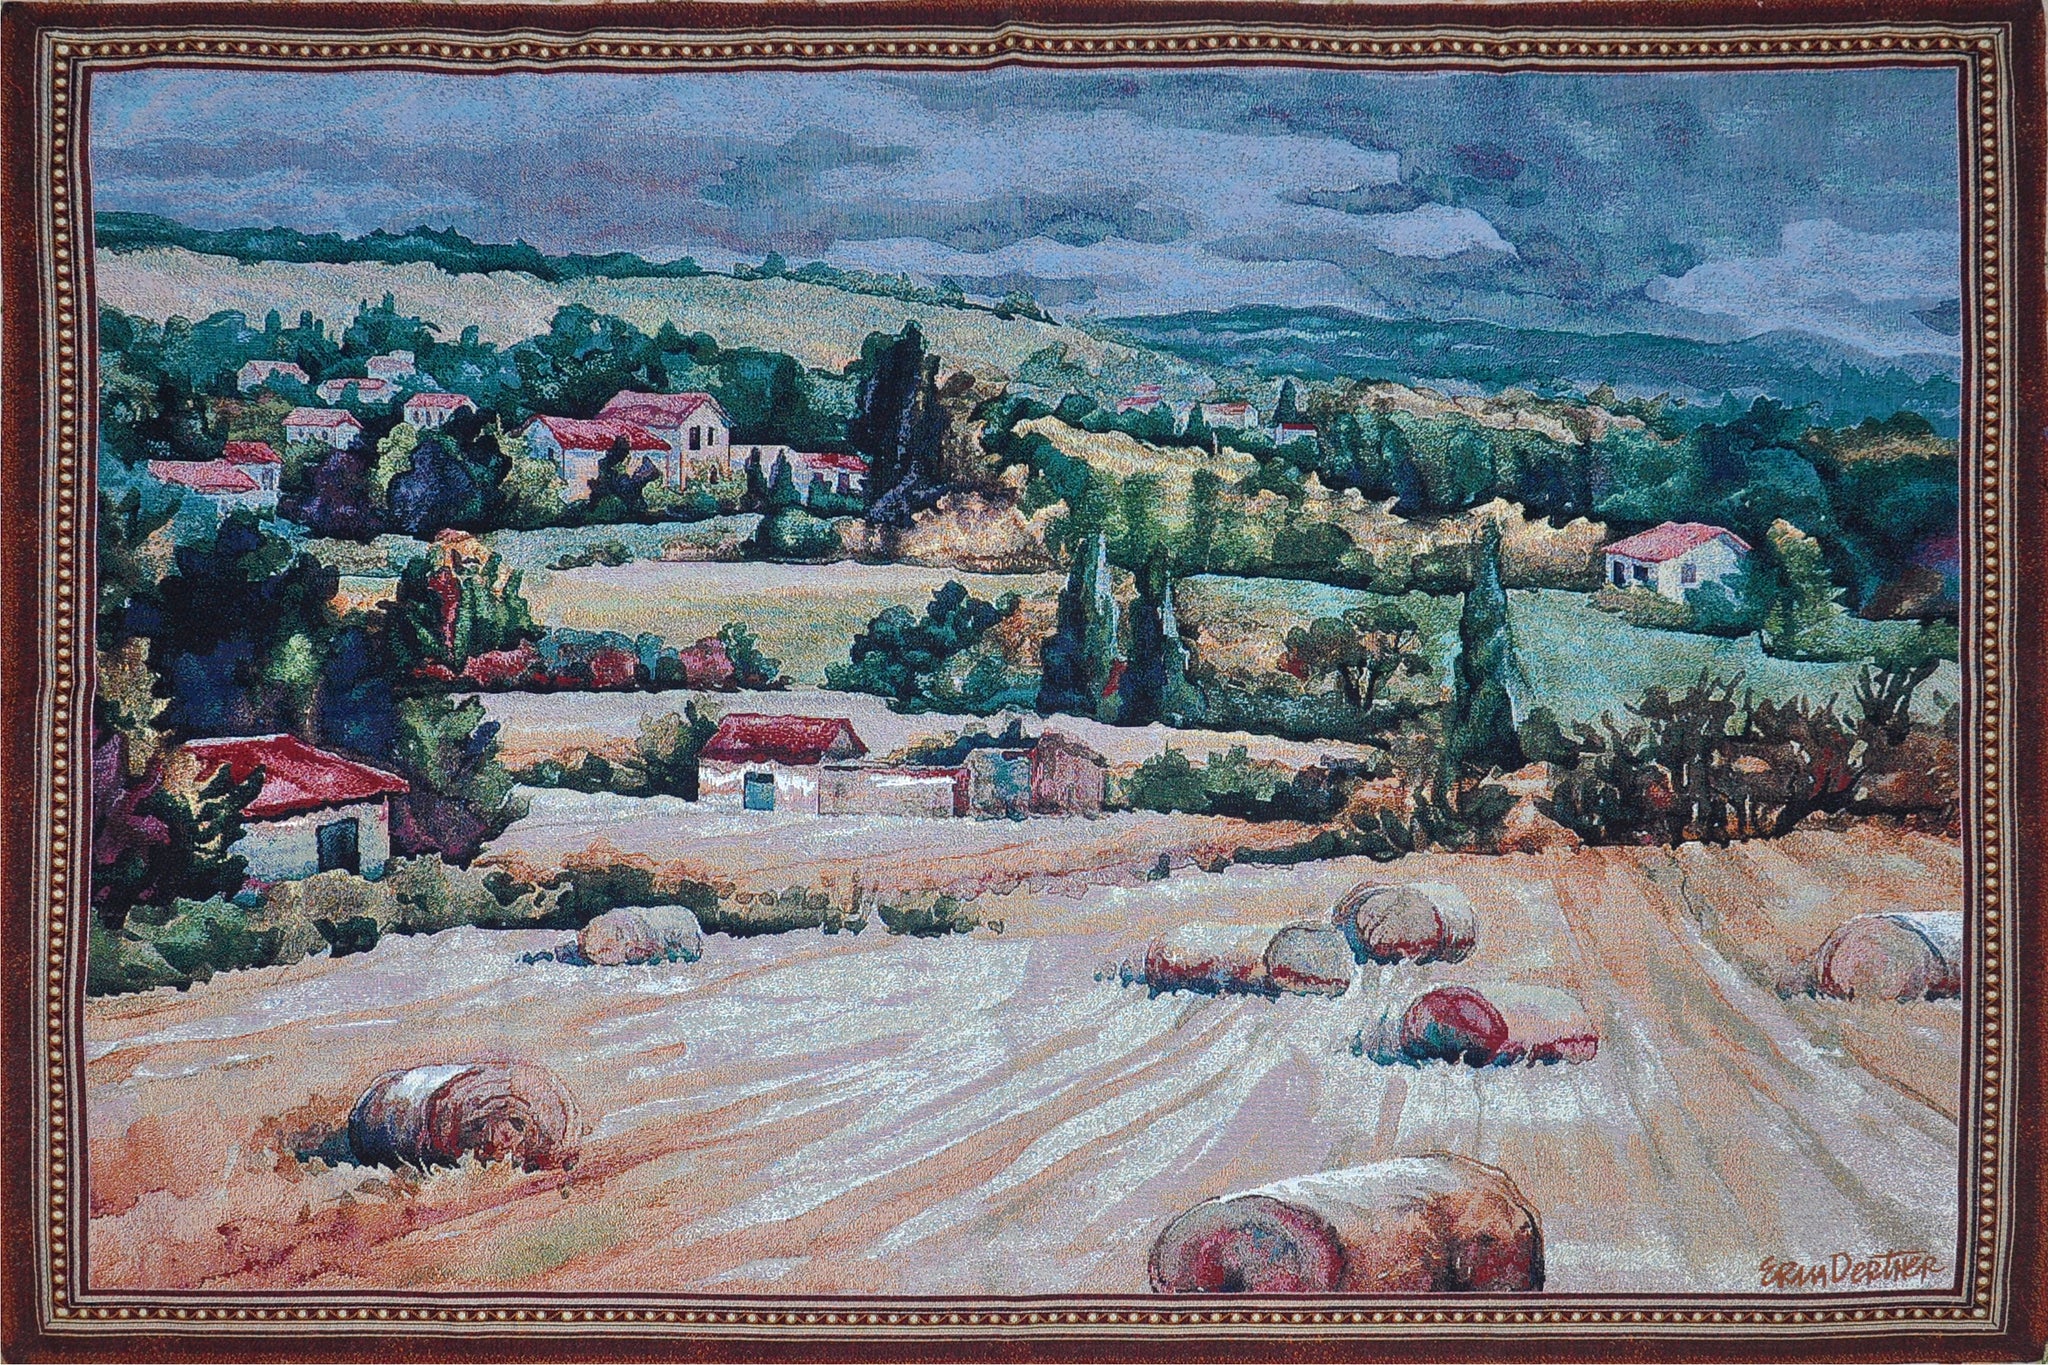 WH-FC | FRENCH COUNTRYSIDE 54 X 36 " INCH WALL HANGING TAPESTRY ART - www.signareusa.com